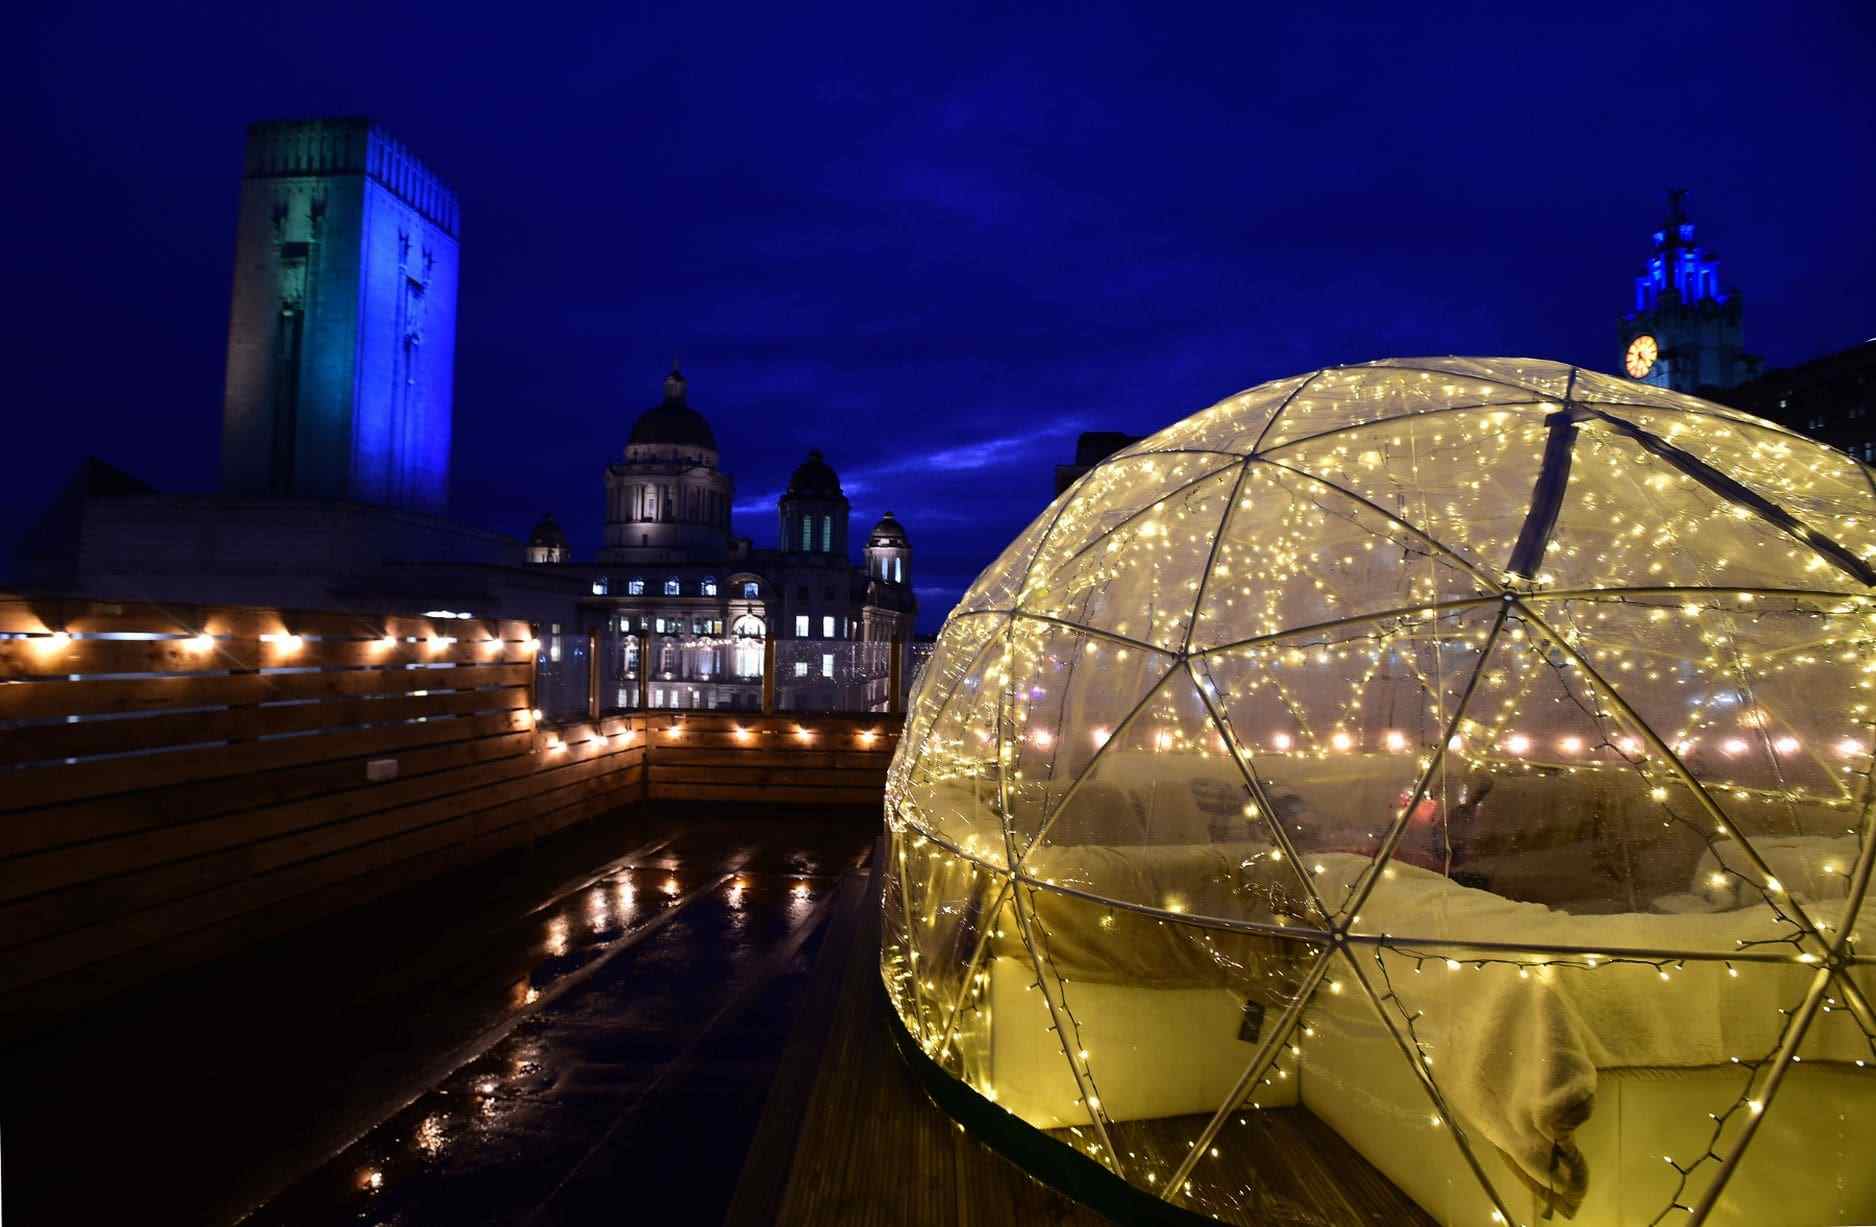 igloo-dome-lit-up-at-night-on-liberté-rooftop-best-cocktail-bars-liverpool